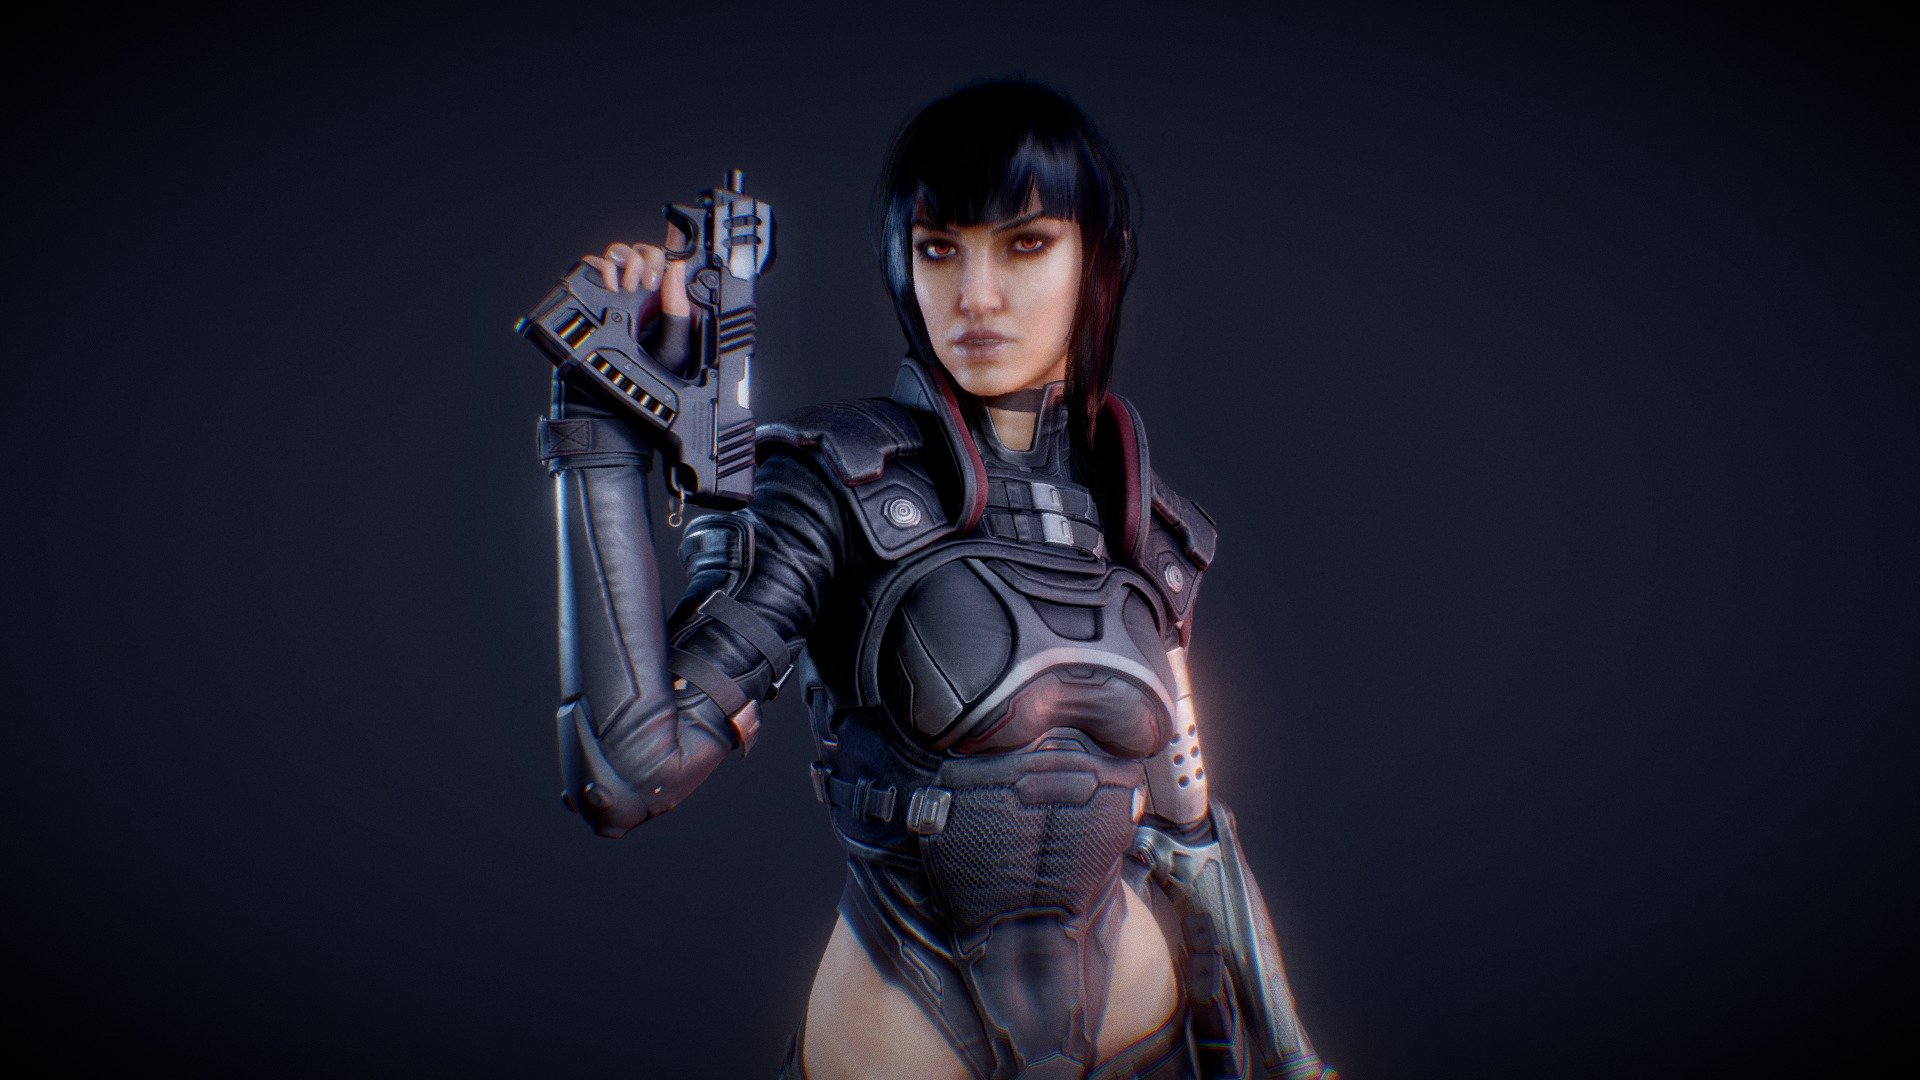 Personnal project inspired by Cyberpunk 2007 and Ghost in the Shell

The .zip file includes: 
* Riggable A-posed mesh in .fbx 
*  .blend scene with the shaded and Rigged character (based on rigify) 
*  Full quality Channel-packed PBR textures in .png (OpenGL normal maps) 
* the marmoset Toolbag 4 scene used to render the preview screens 3d model